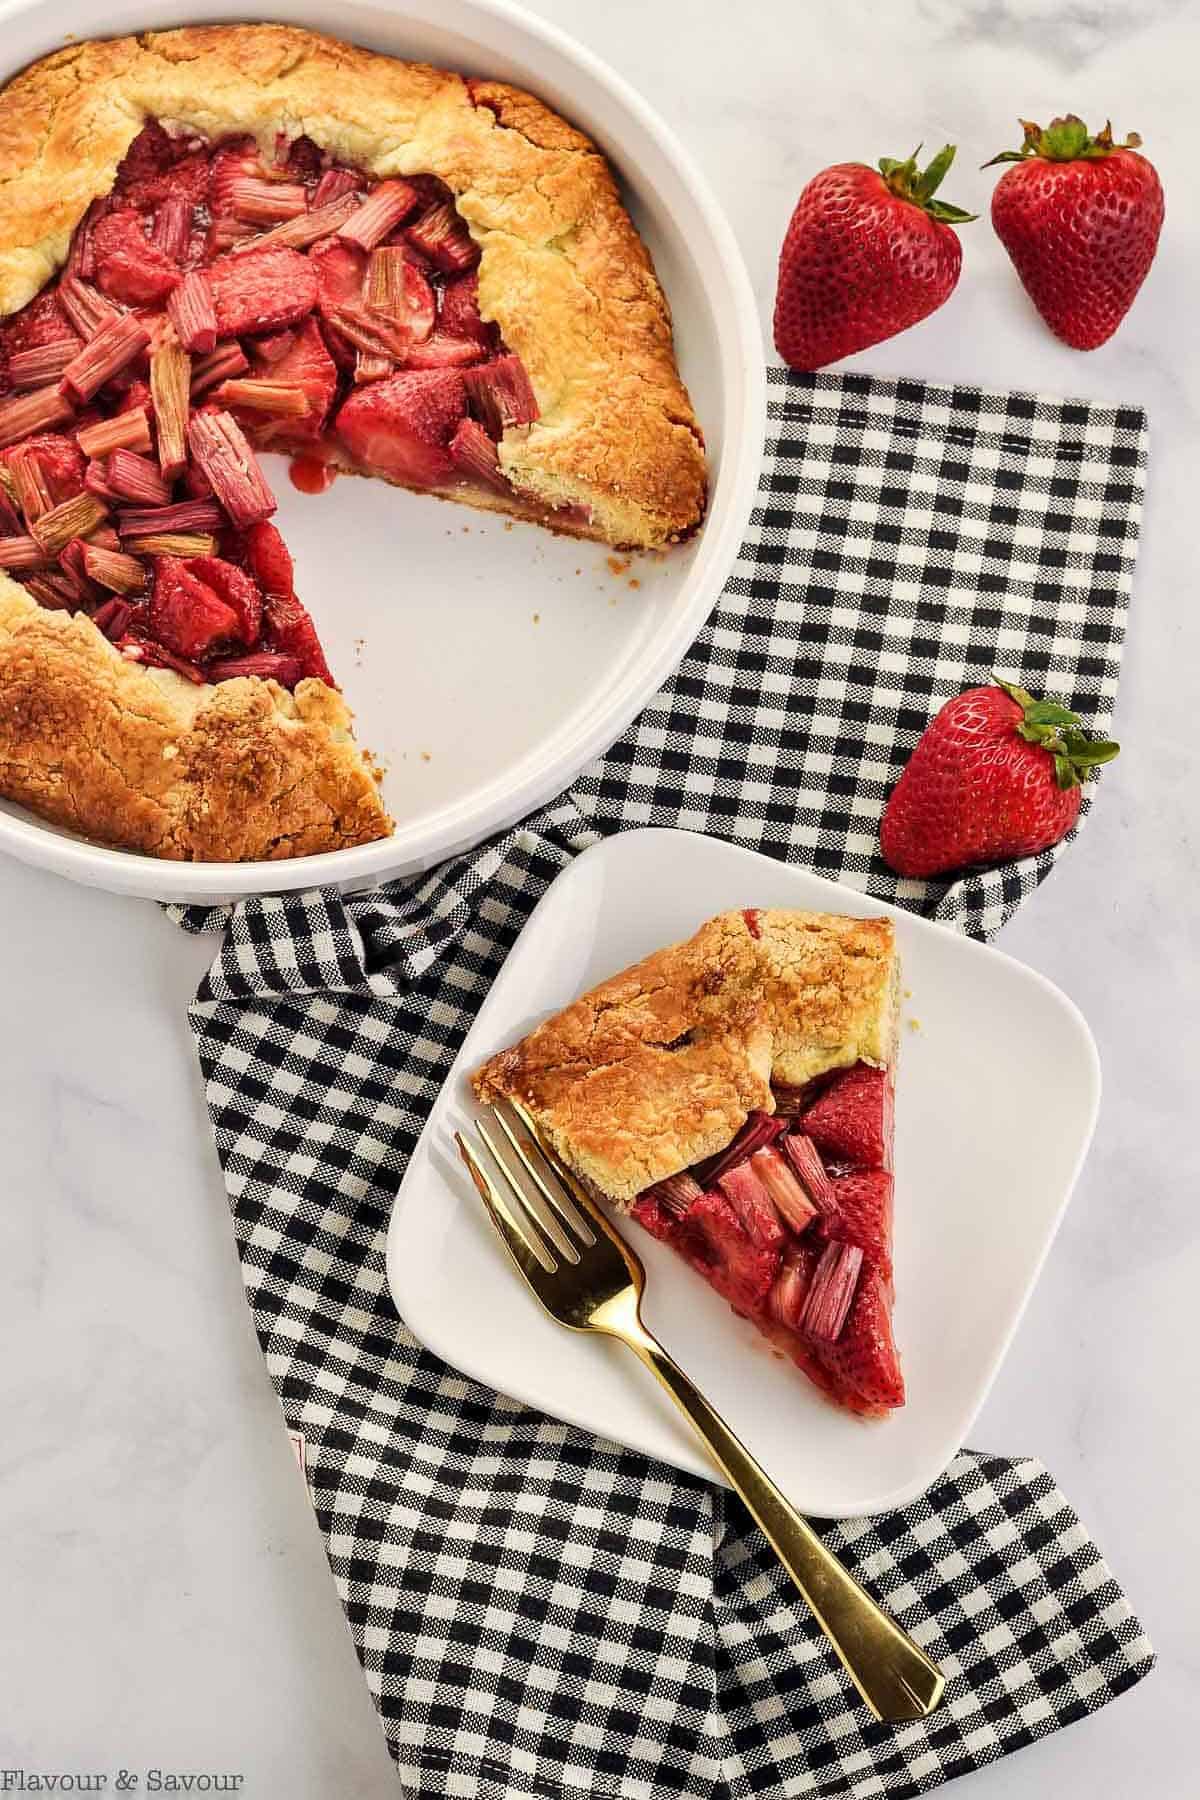 overhead view of strawberry rhubarb galette on a black checkered cloth